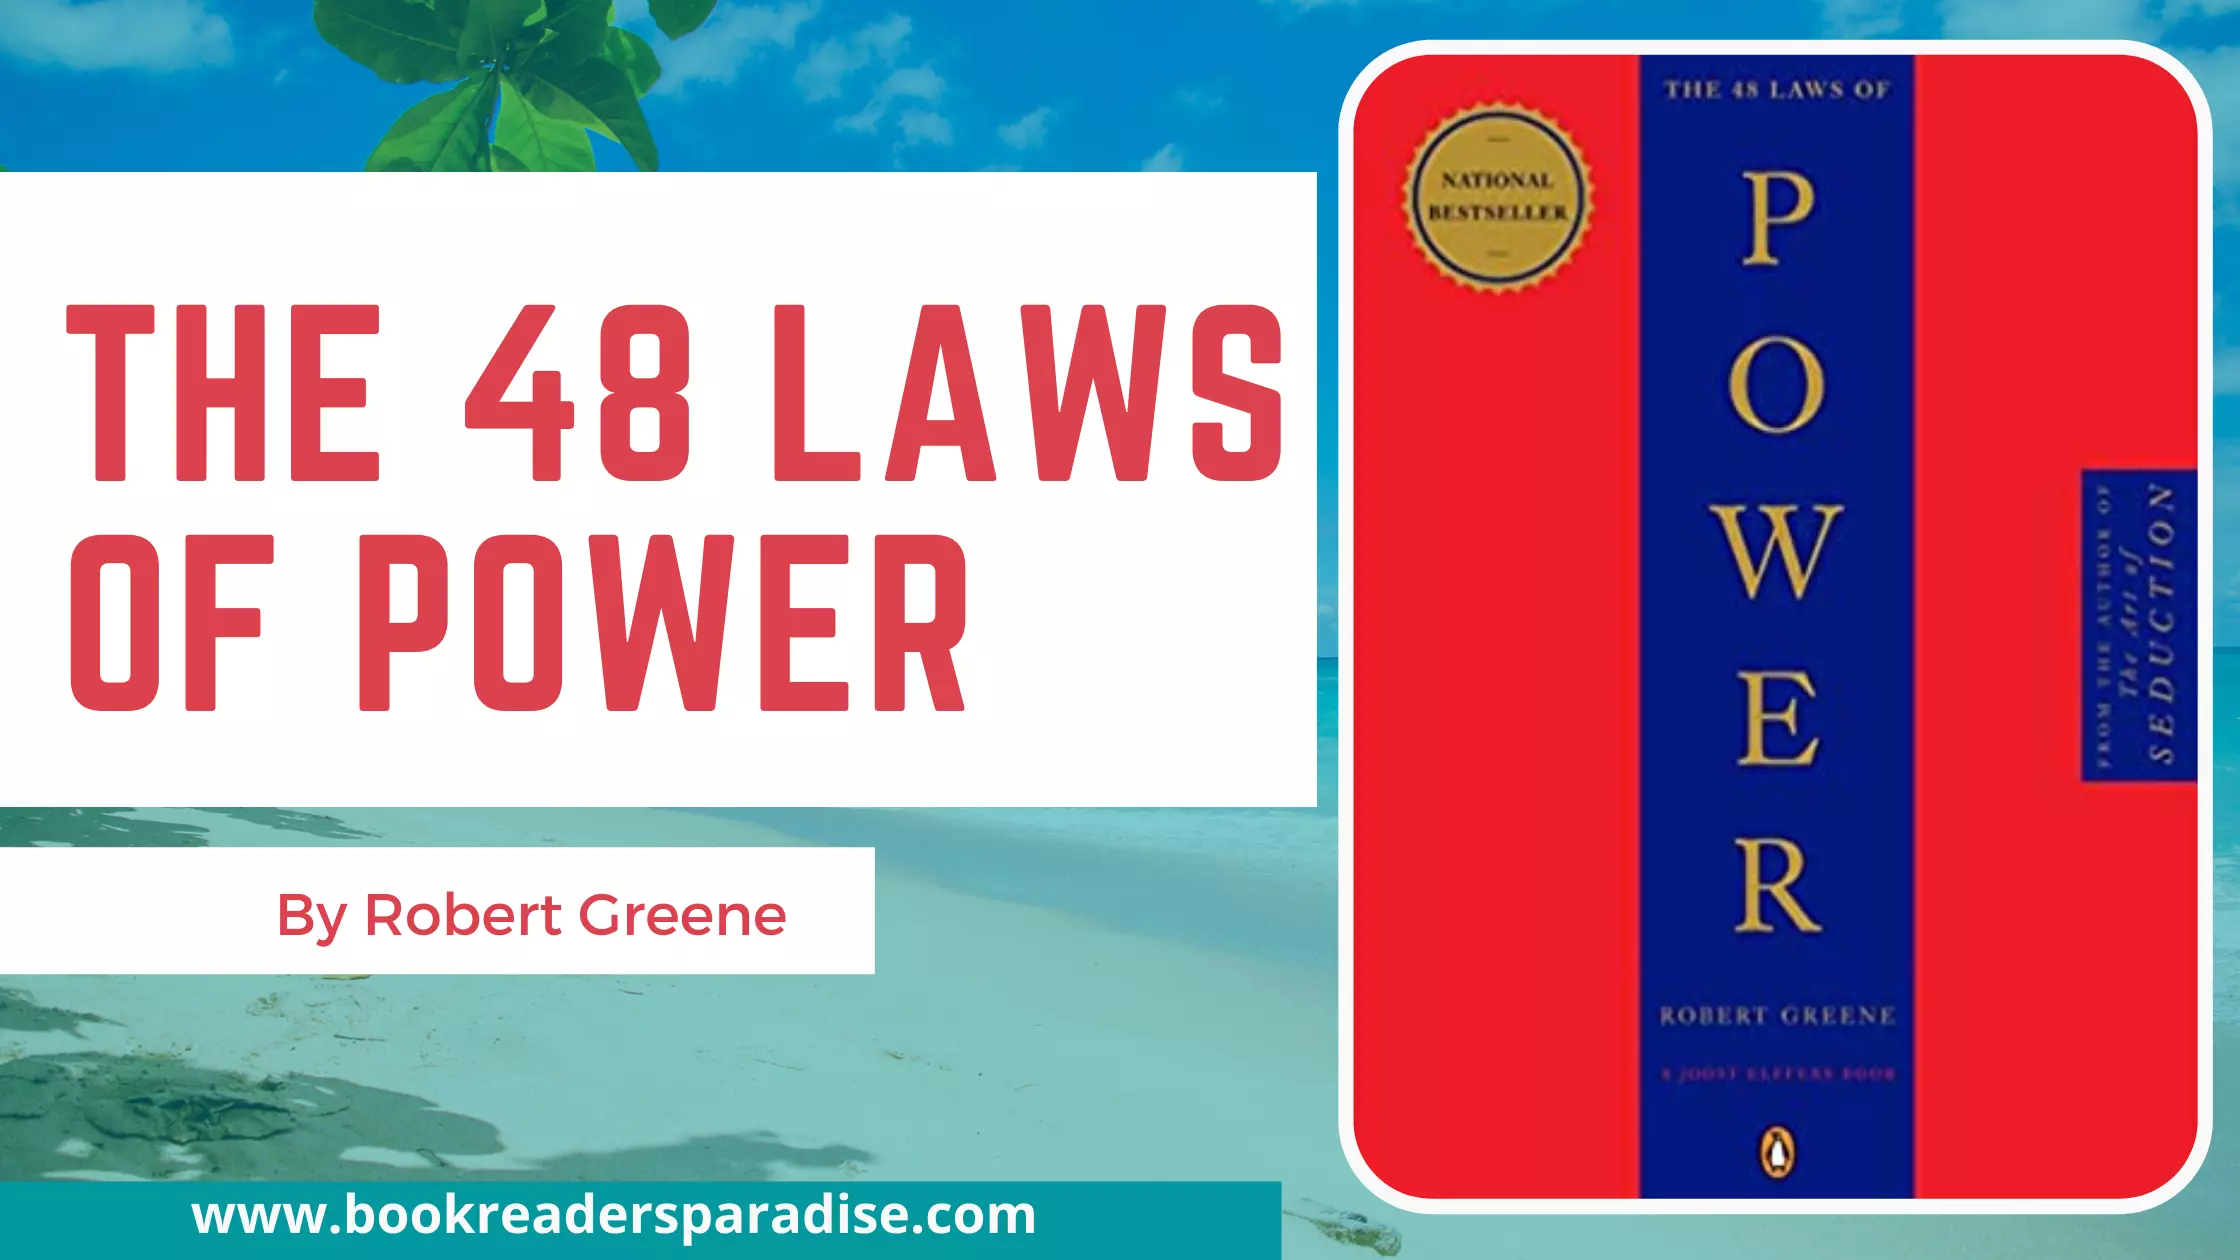 48 laws of power free pdf book download book download free sites